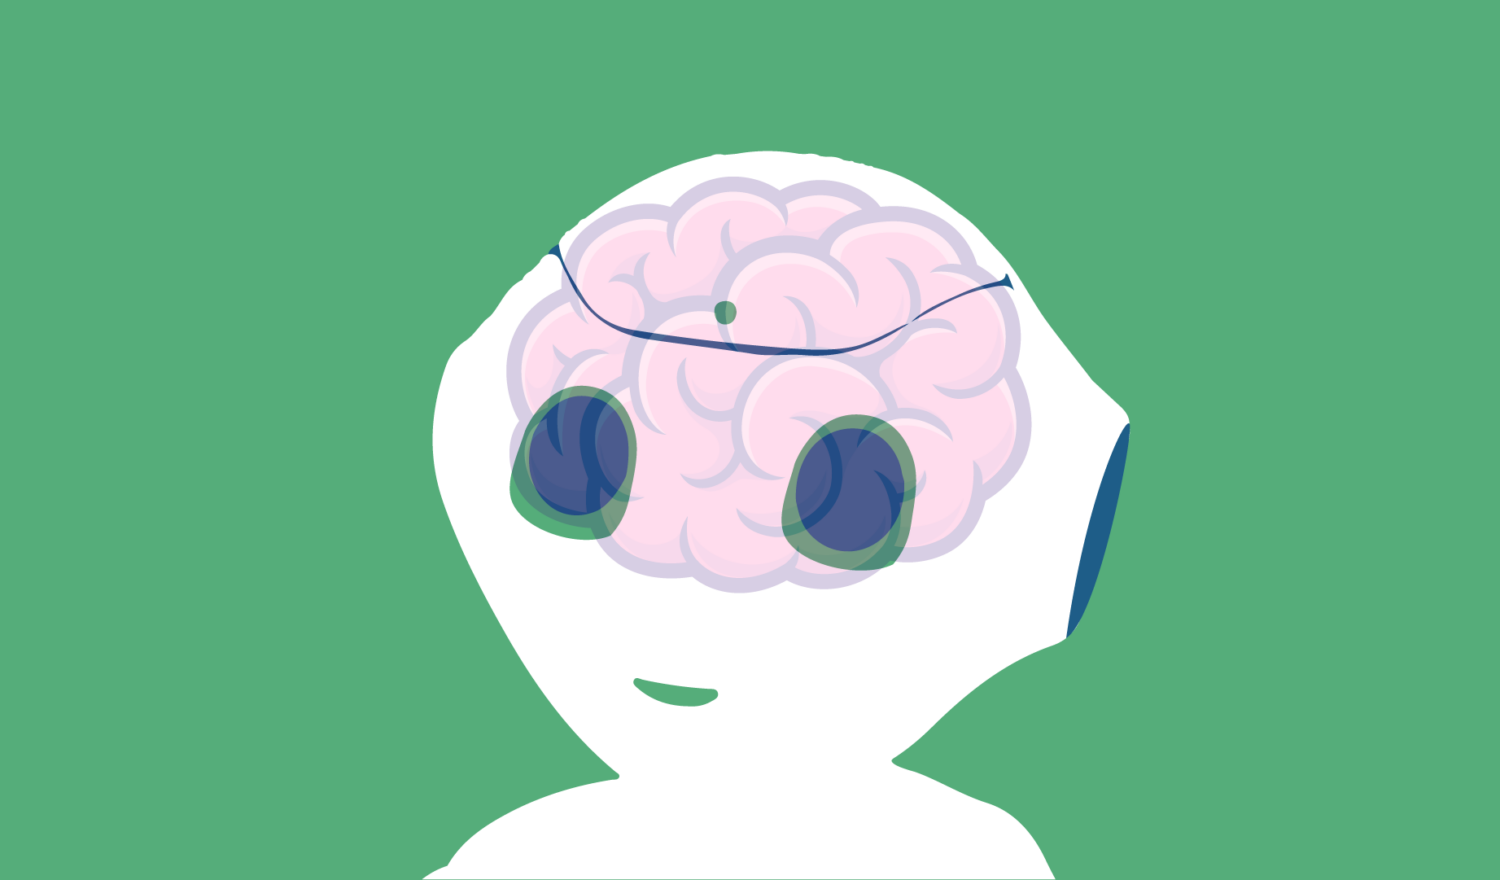 Illustration of Pepper the robot with a superimposed brain